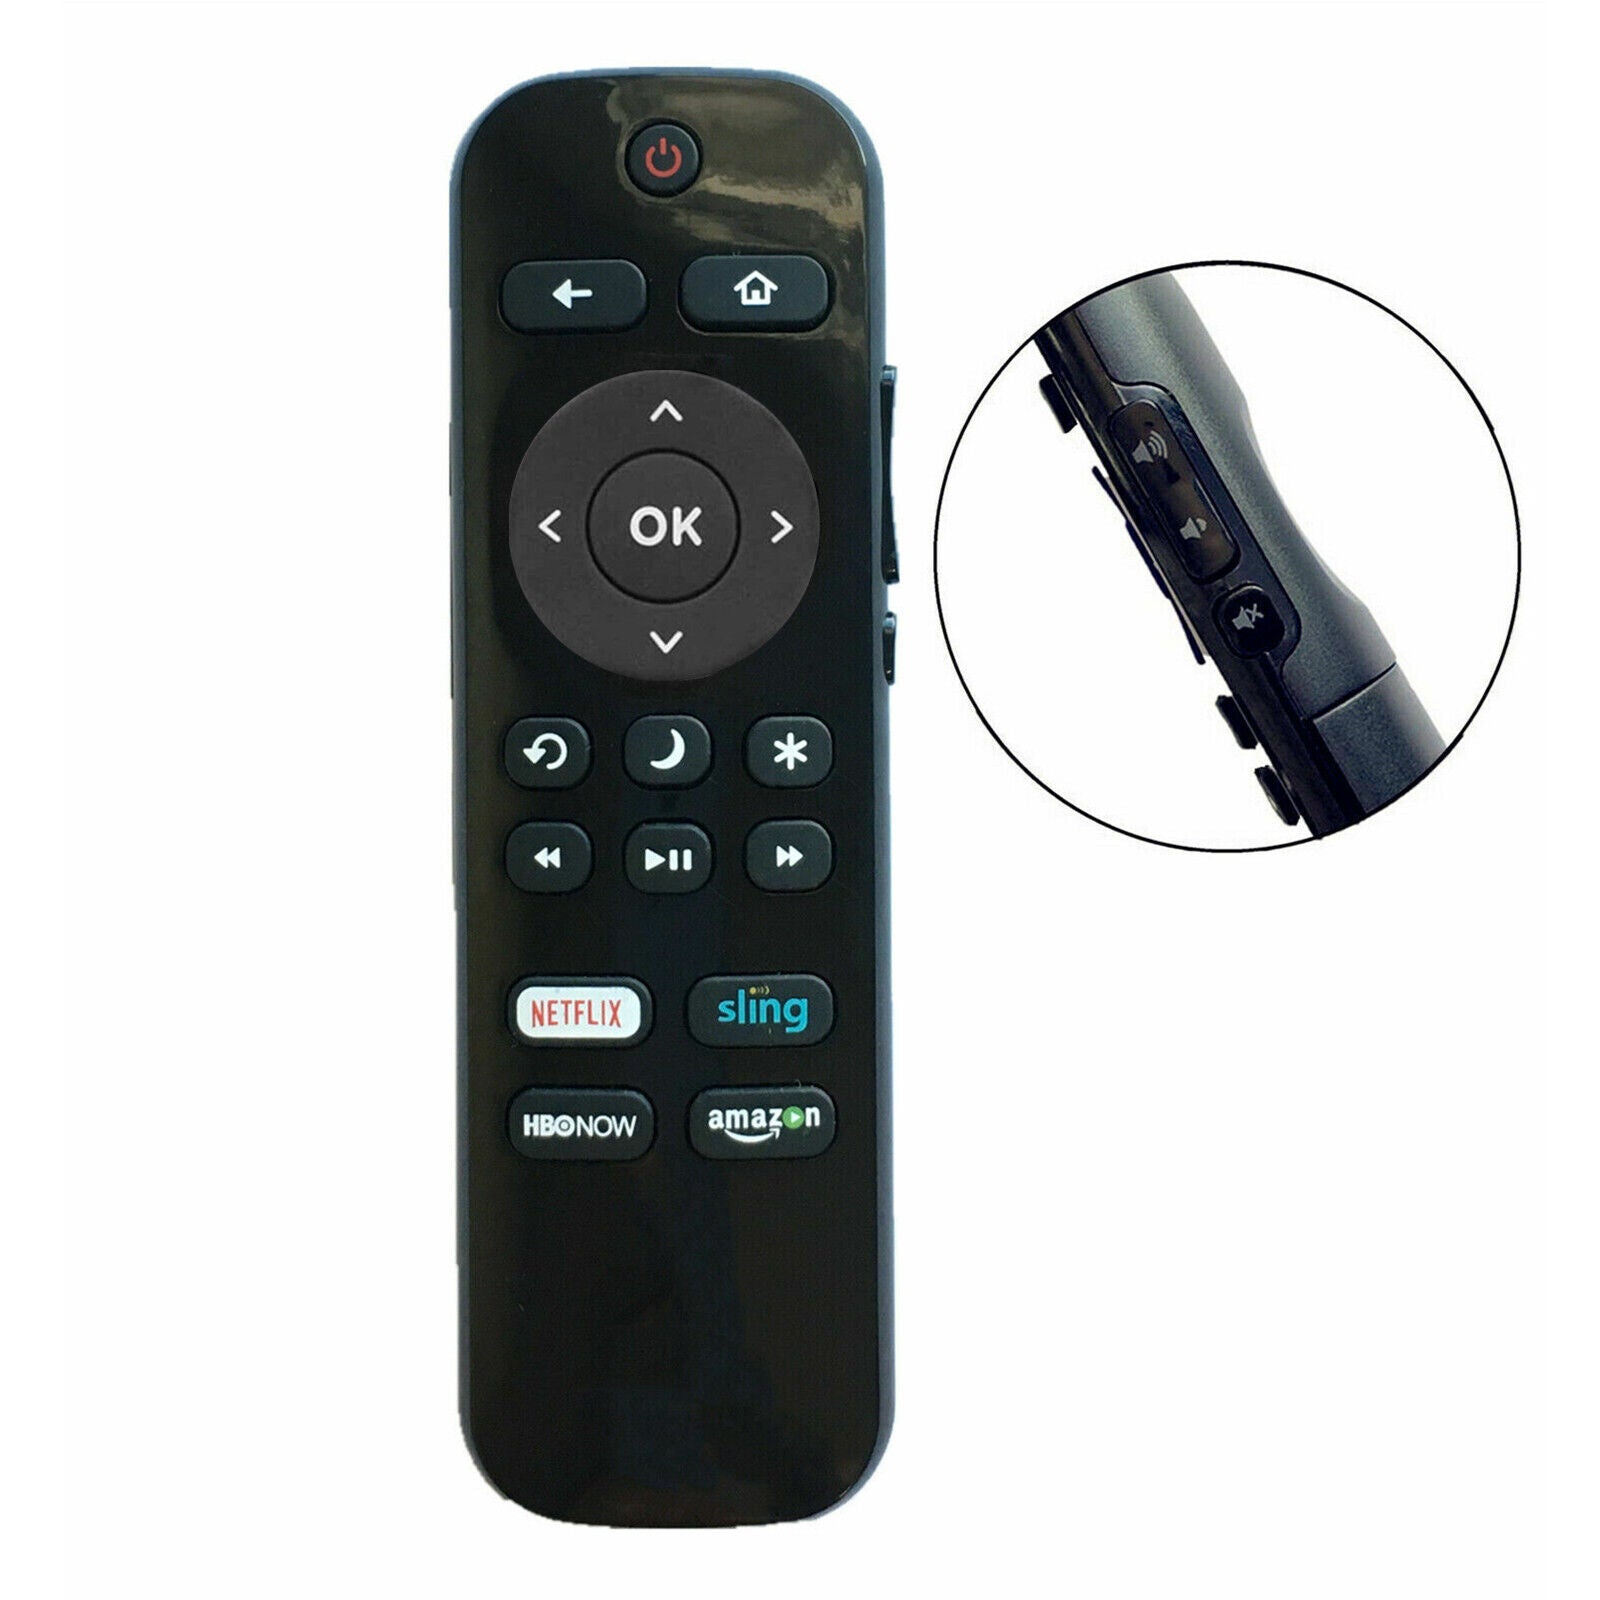 New Remote LC-RCRUS-17 for Sharp ROKU TV with Netflix Sling HBONOW Amazon